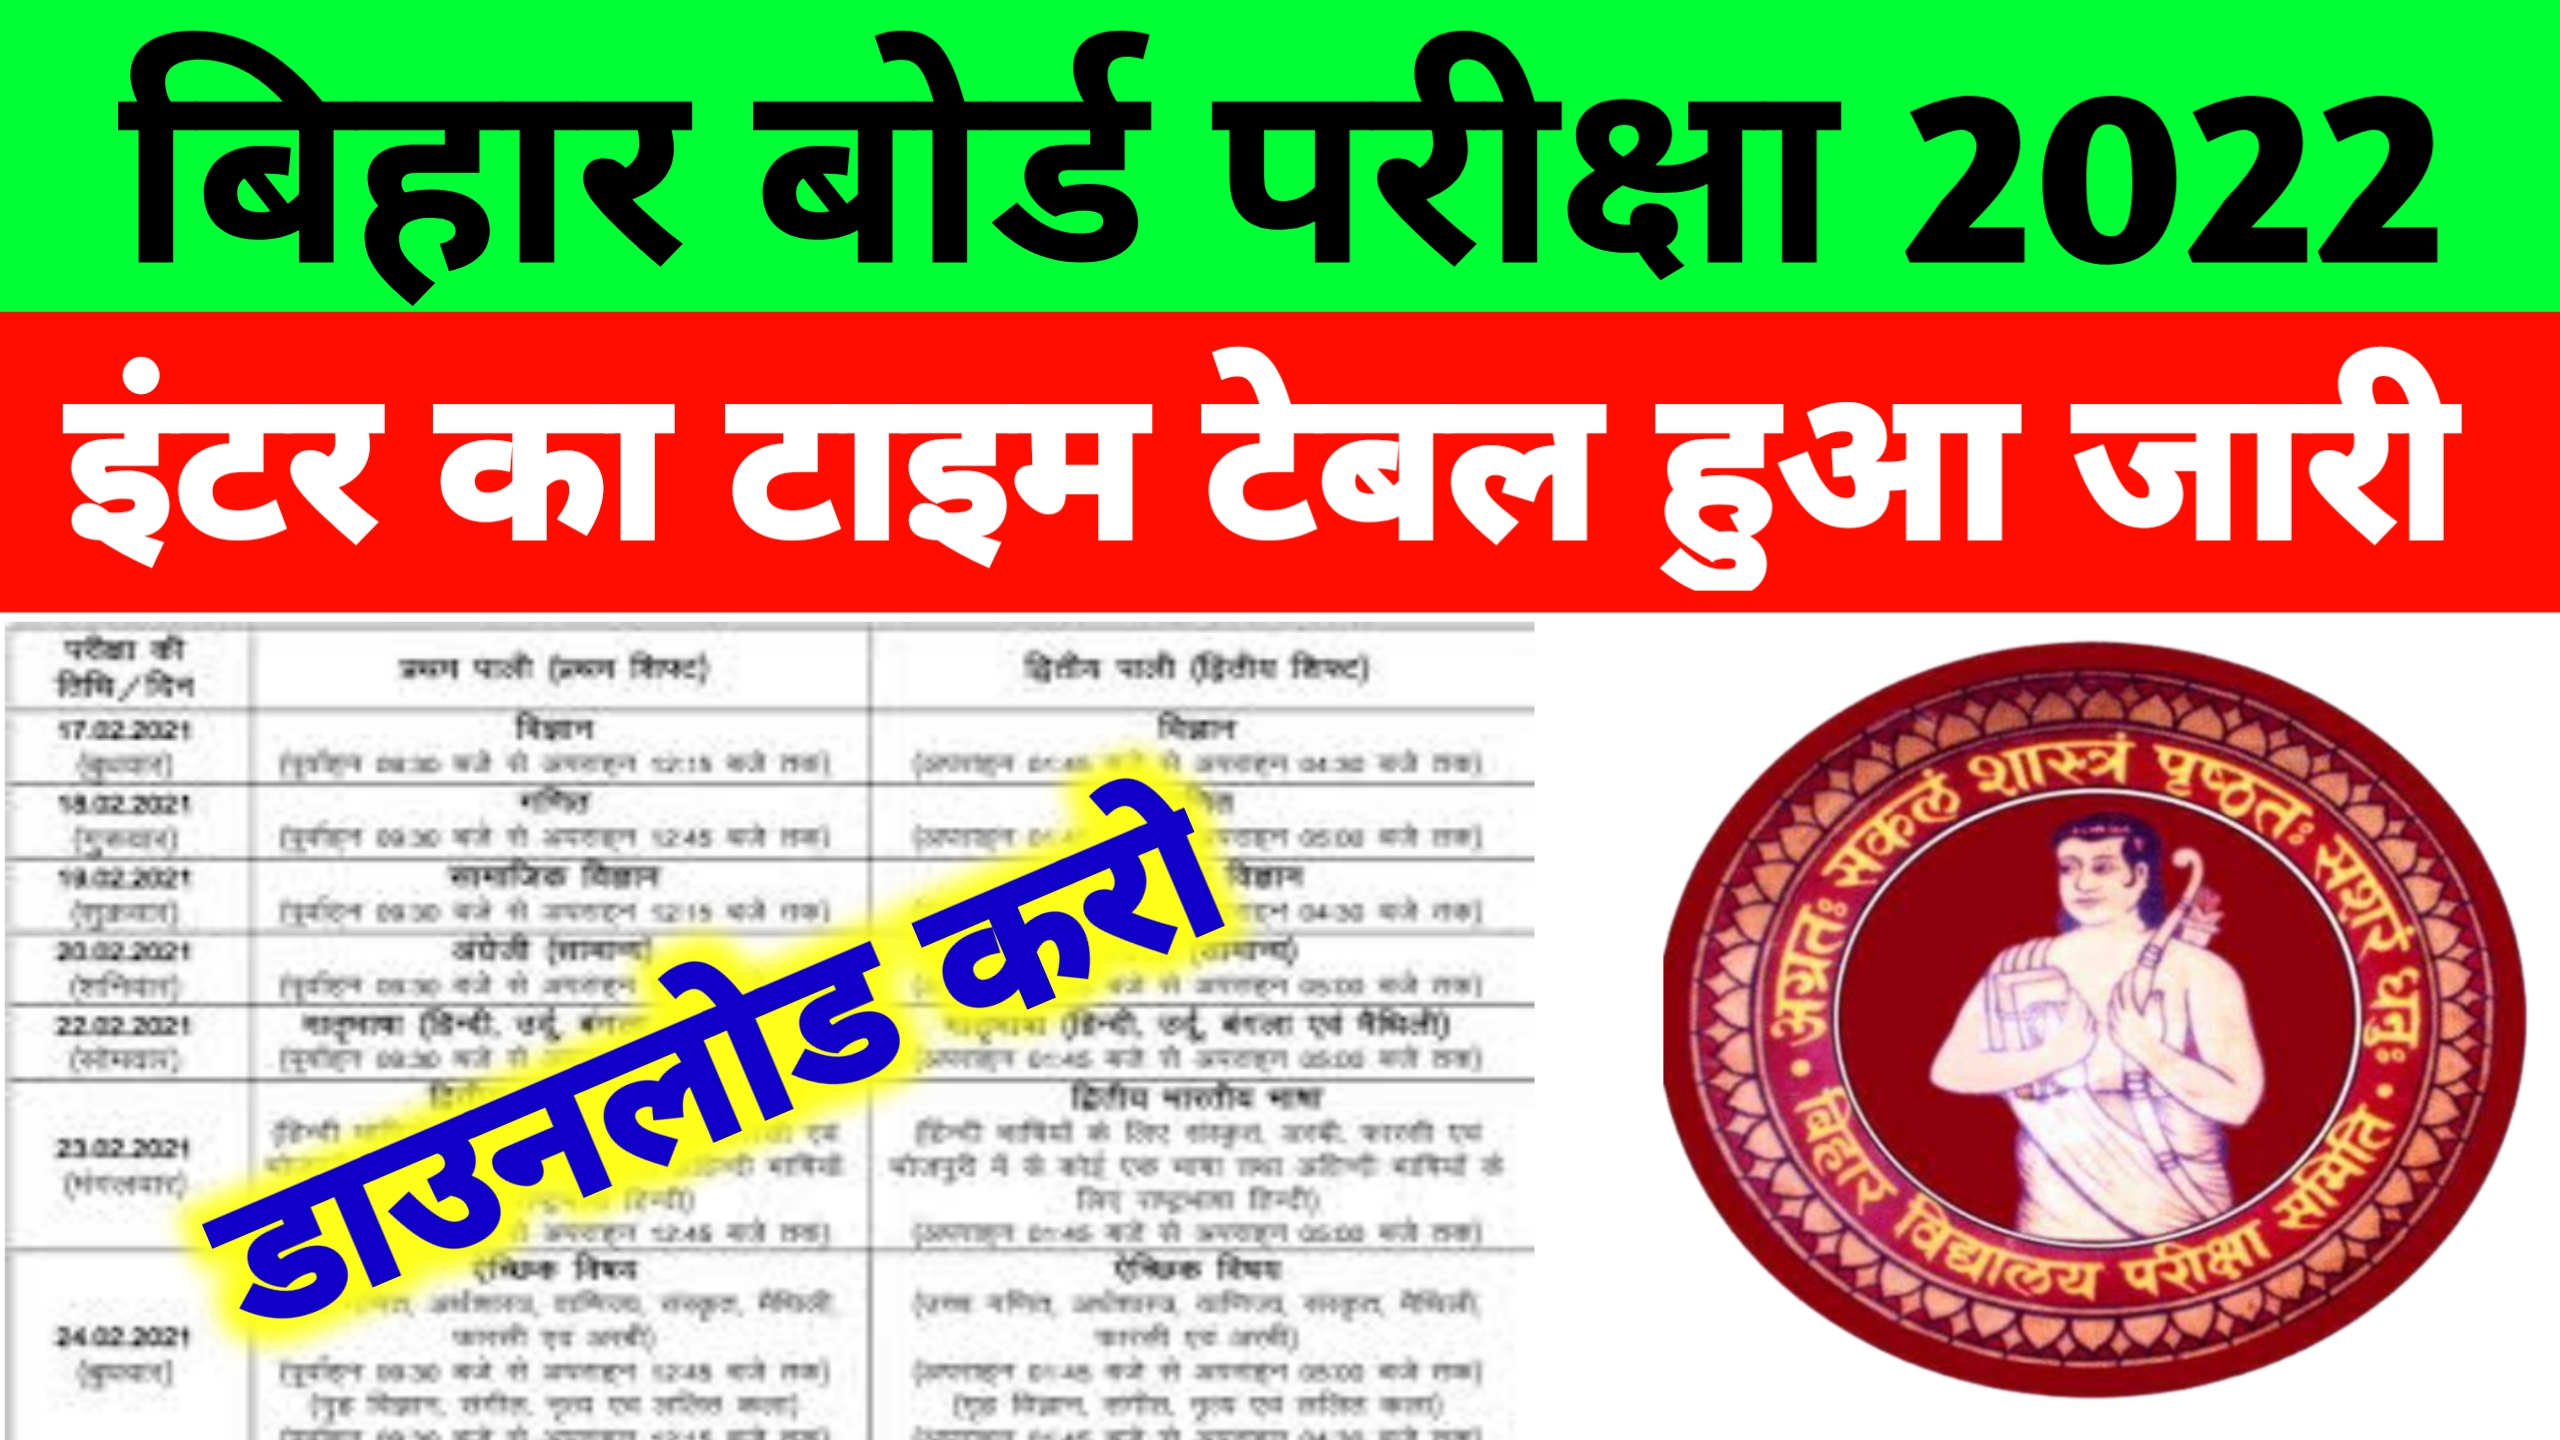 Bihar Board 12th Exam Date 2022 अभी अभी हुआ जारी : Bseb Intet Exam Date 2022 For Science,Arts,Commerce